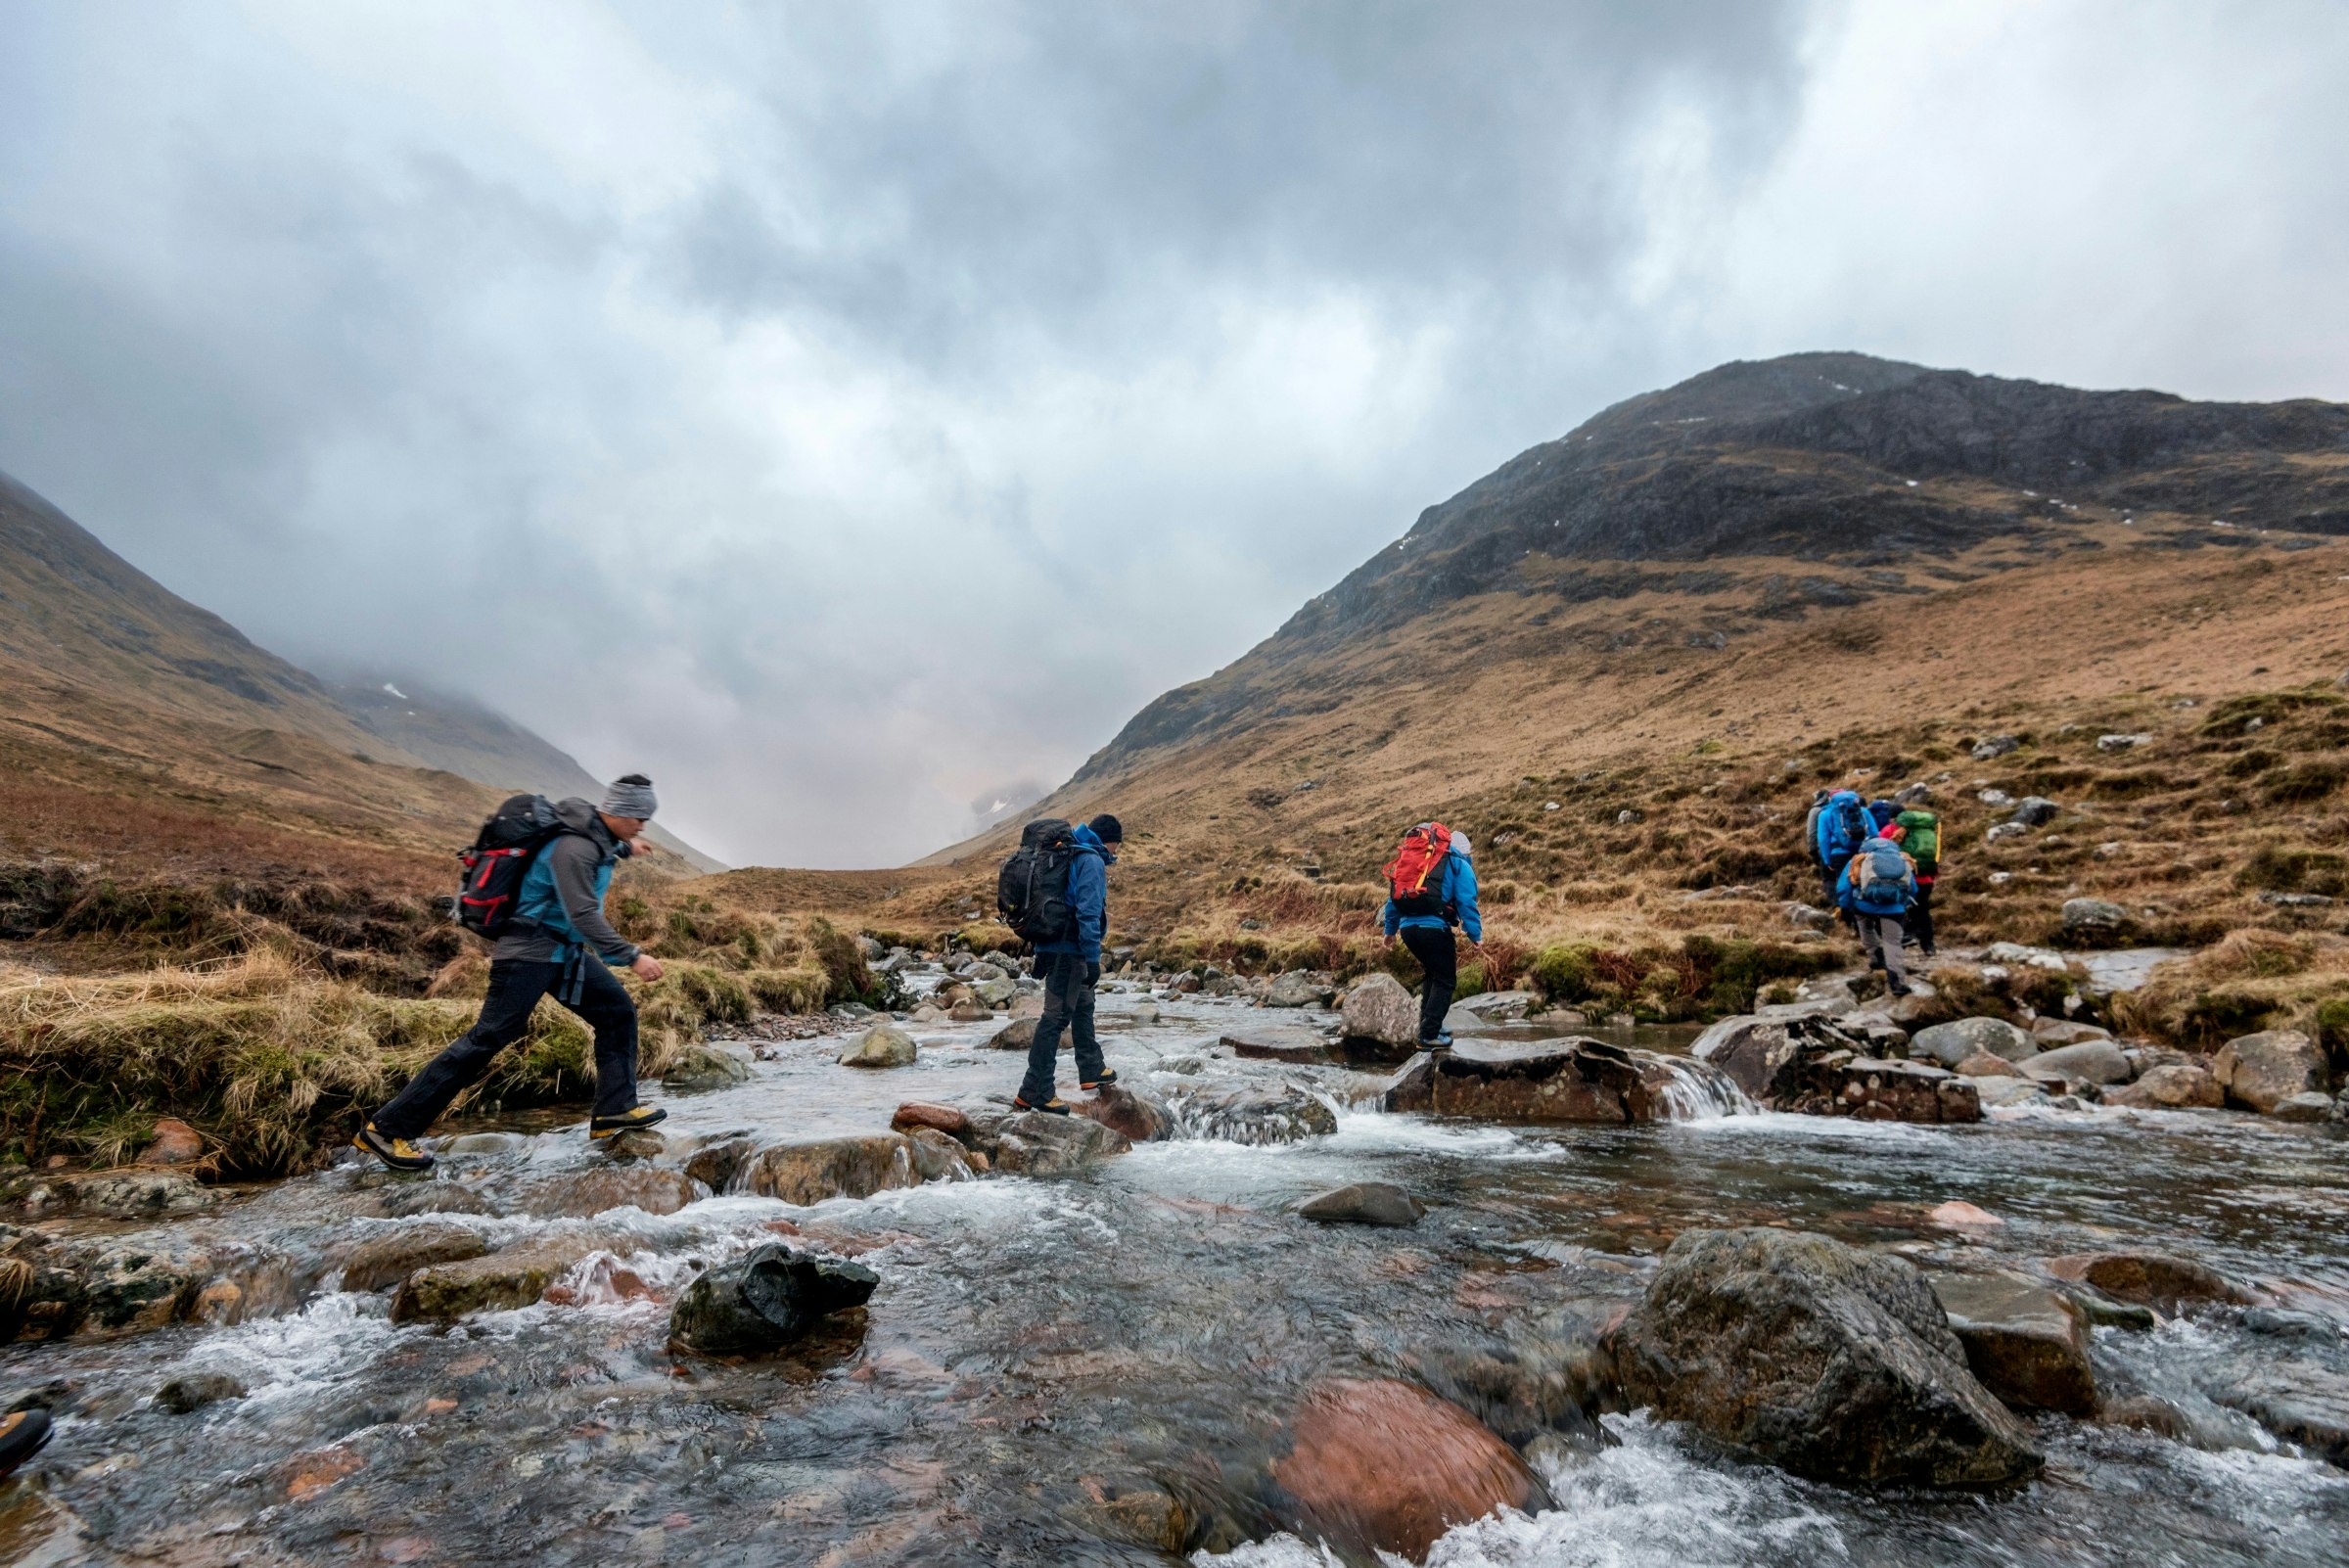 A trekking group crossing a stream on the Sron na Lairig route